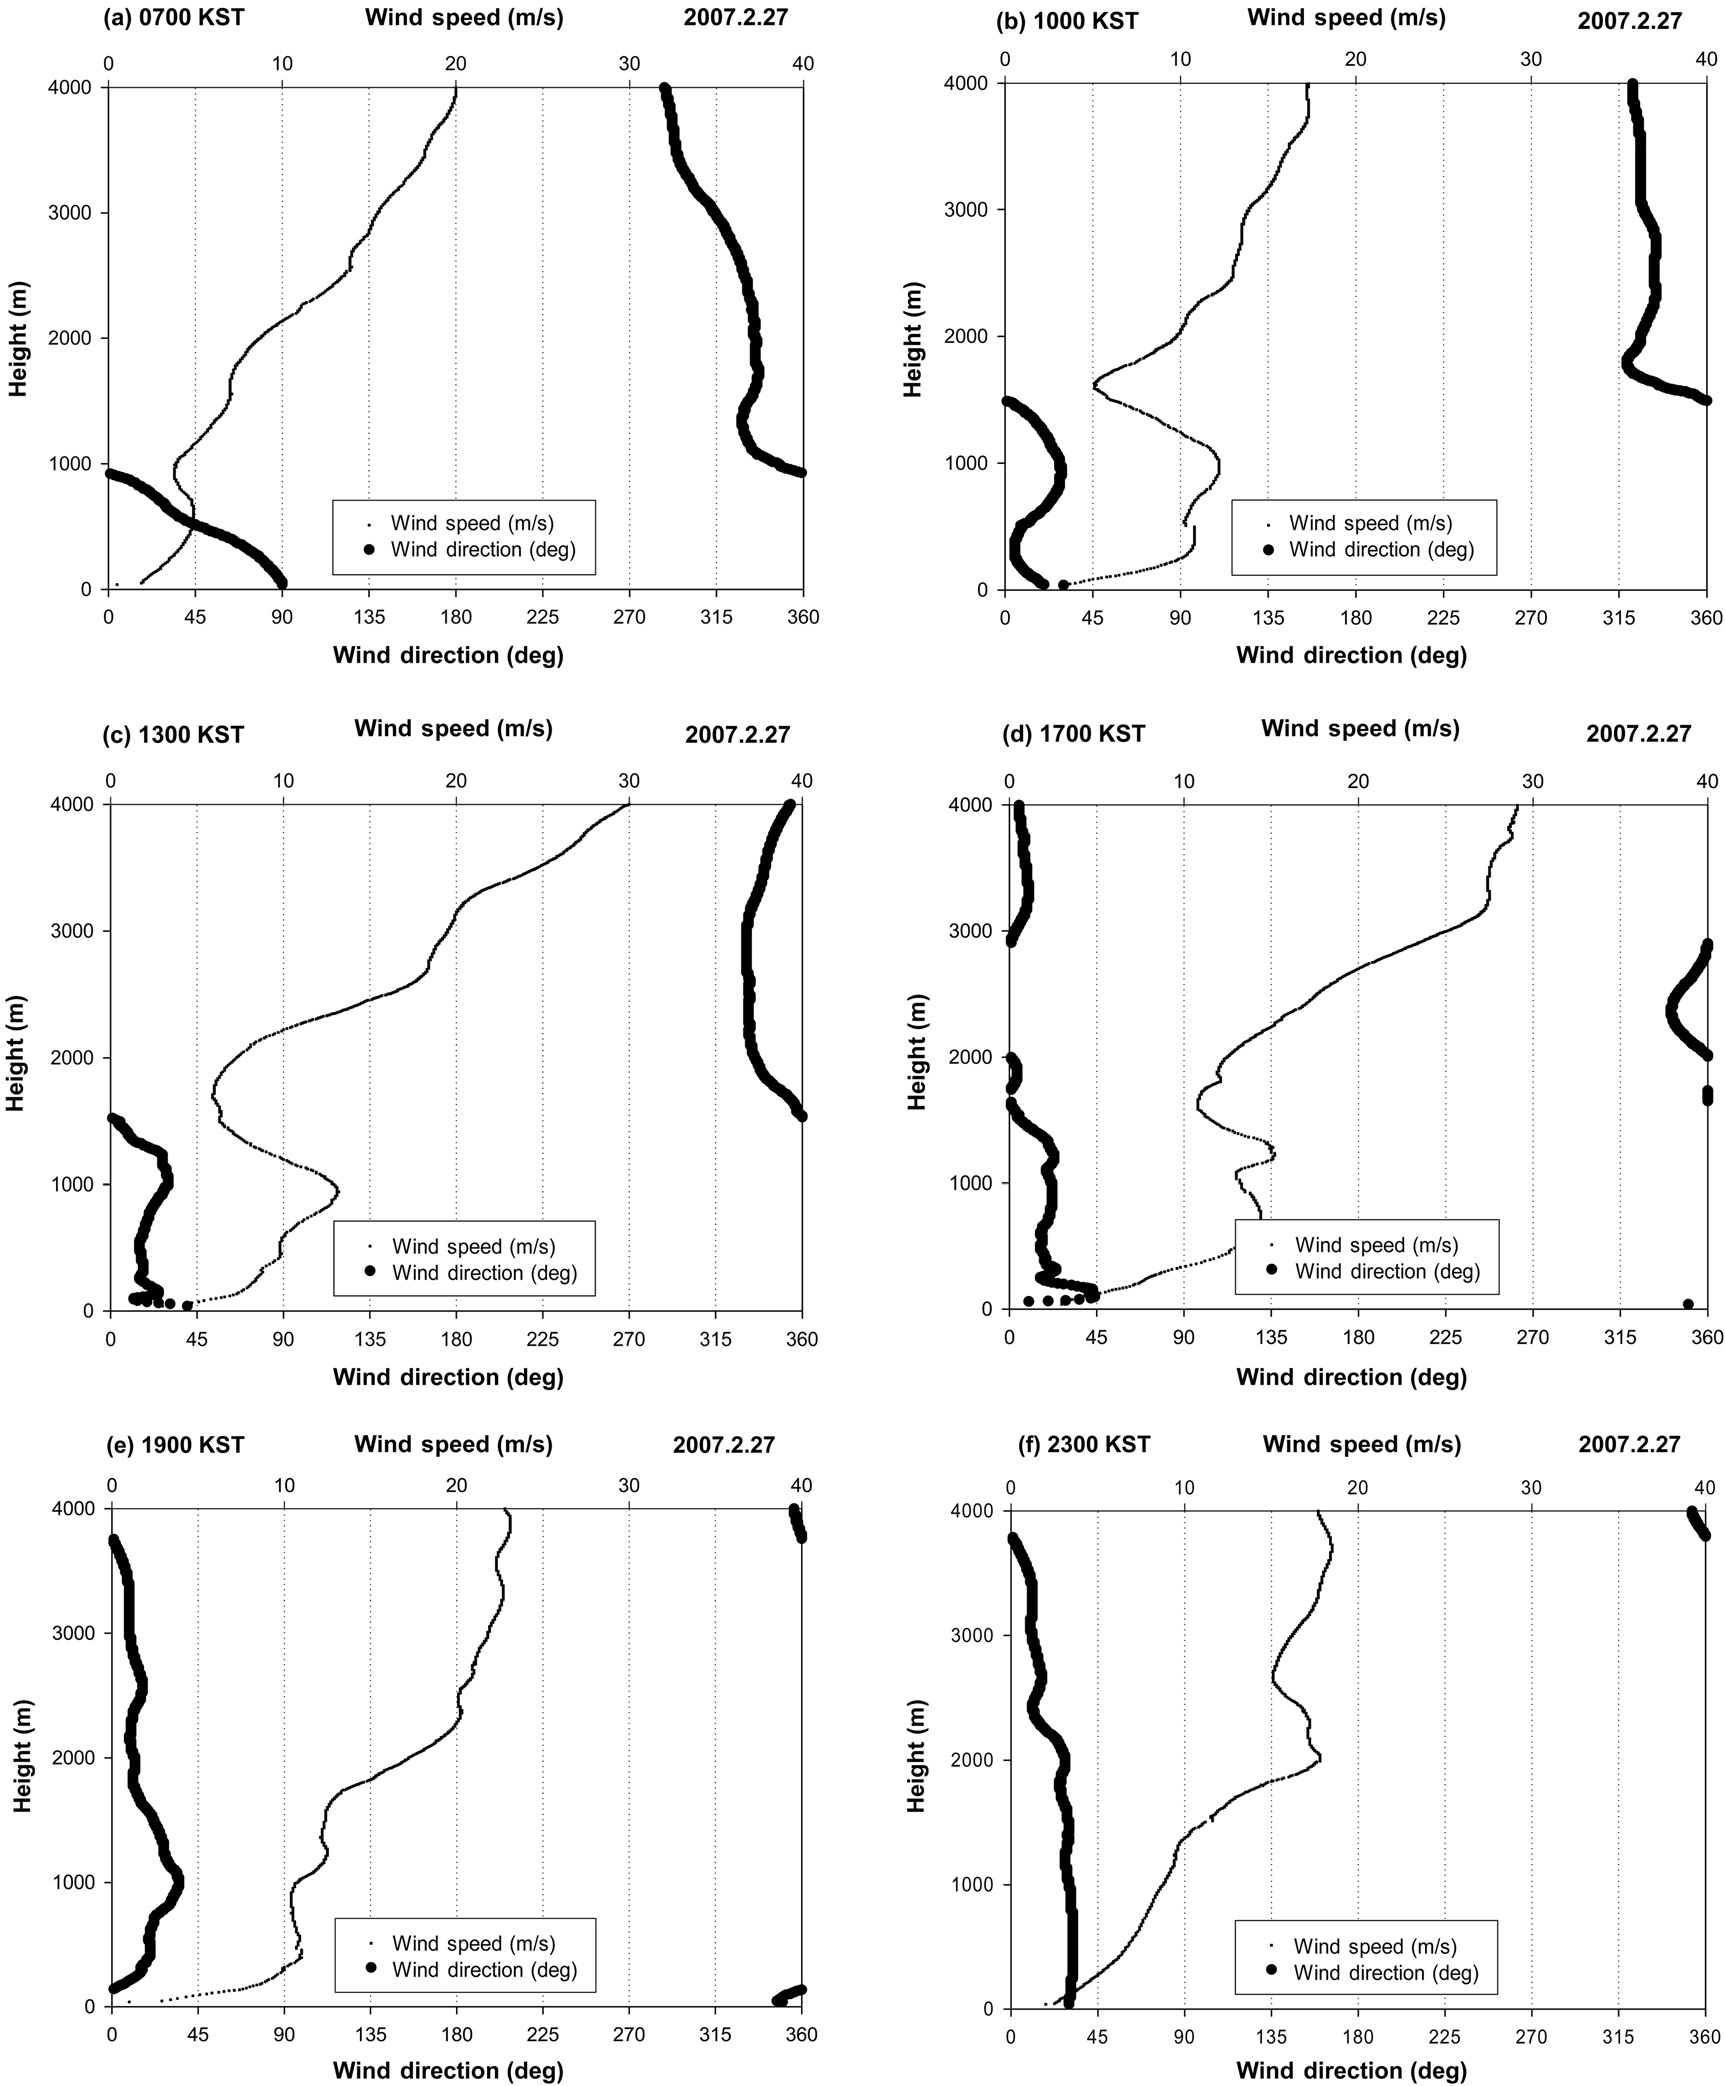 Vertical profiles of wind vector and wind speed at each observation time (2007.2.27).